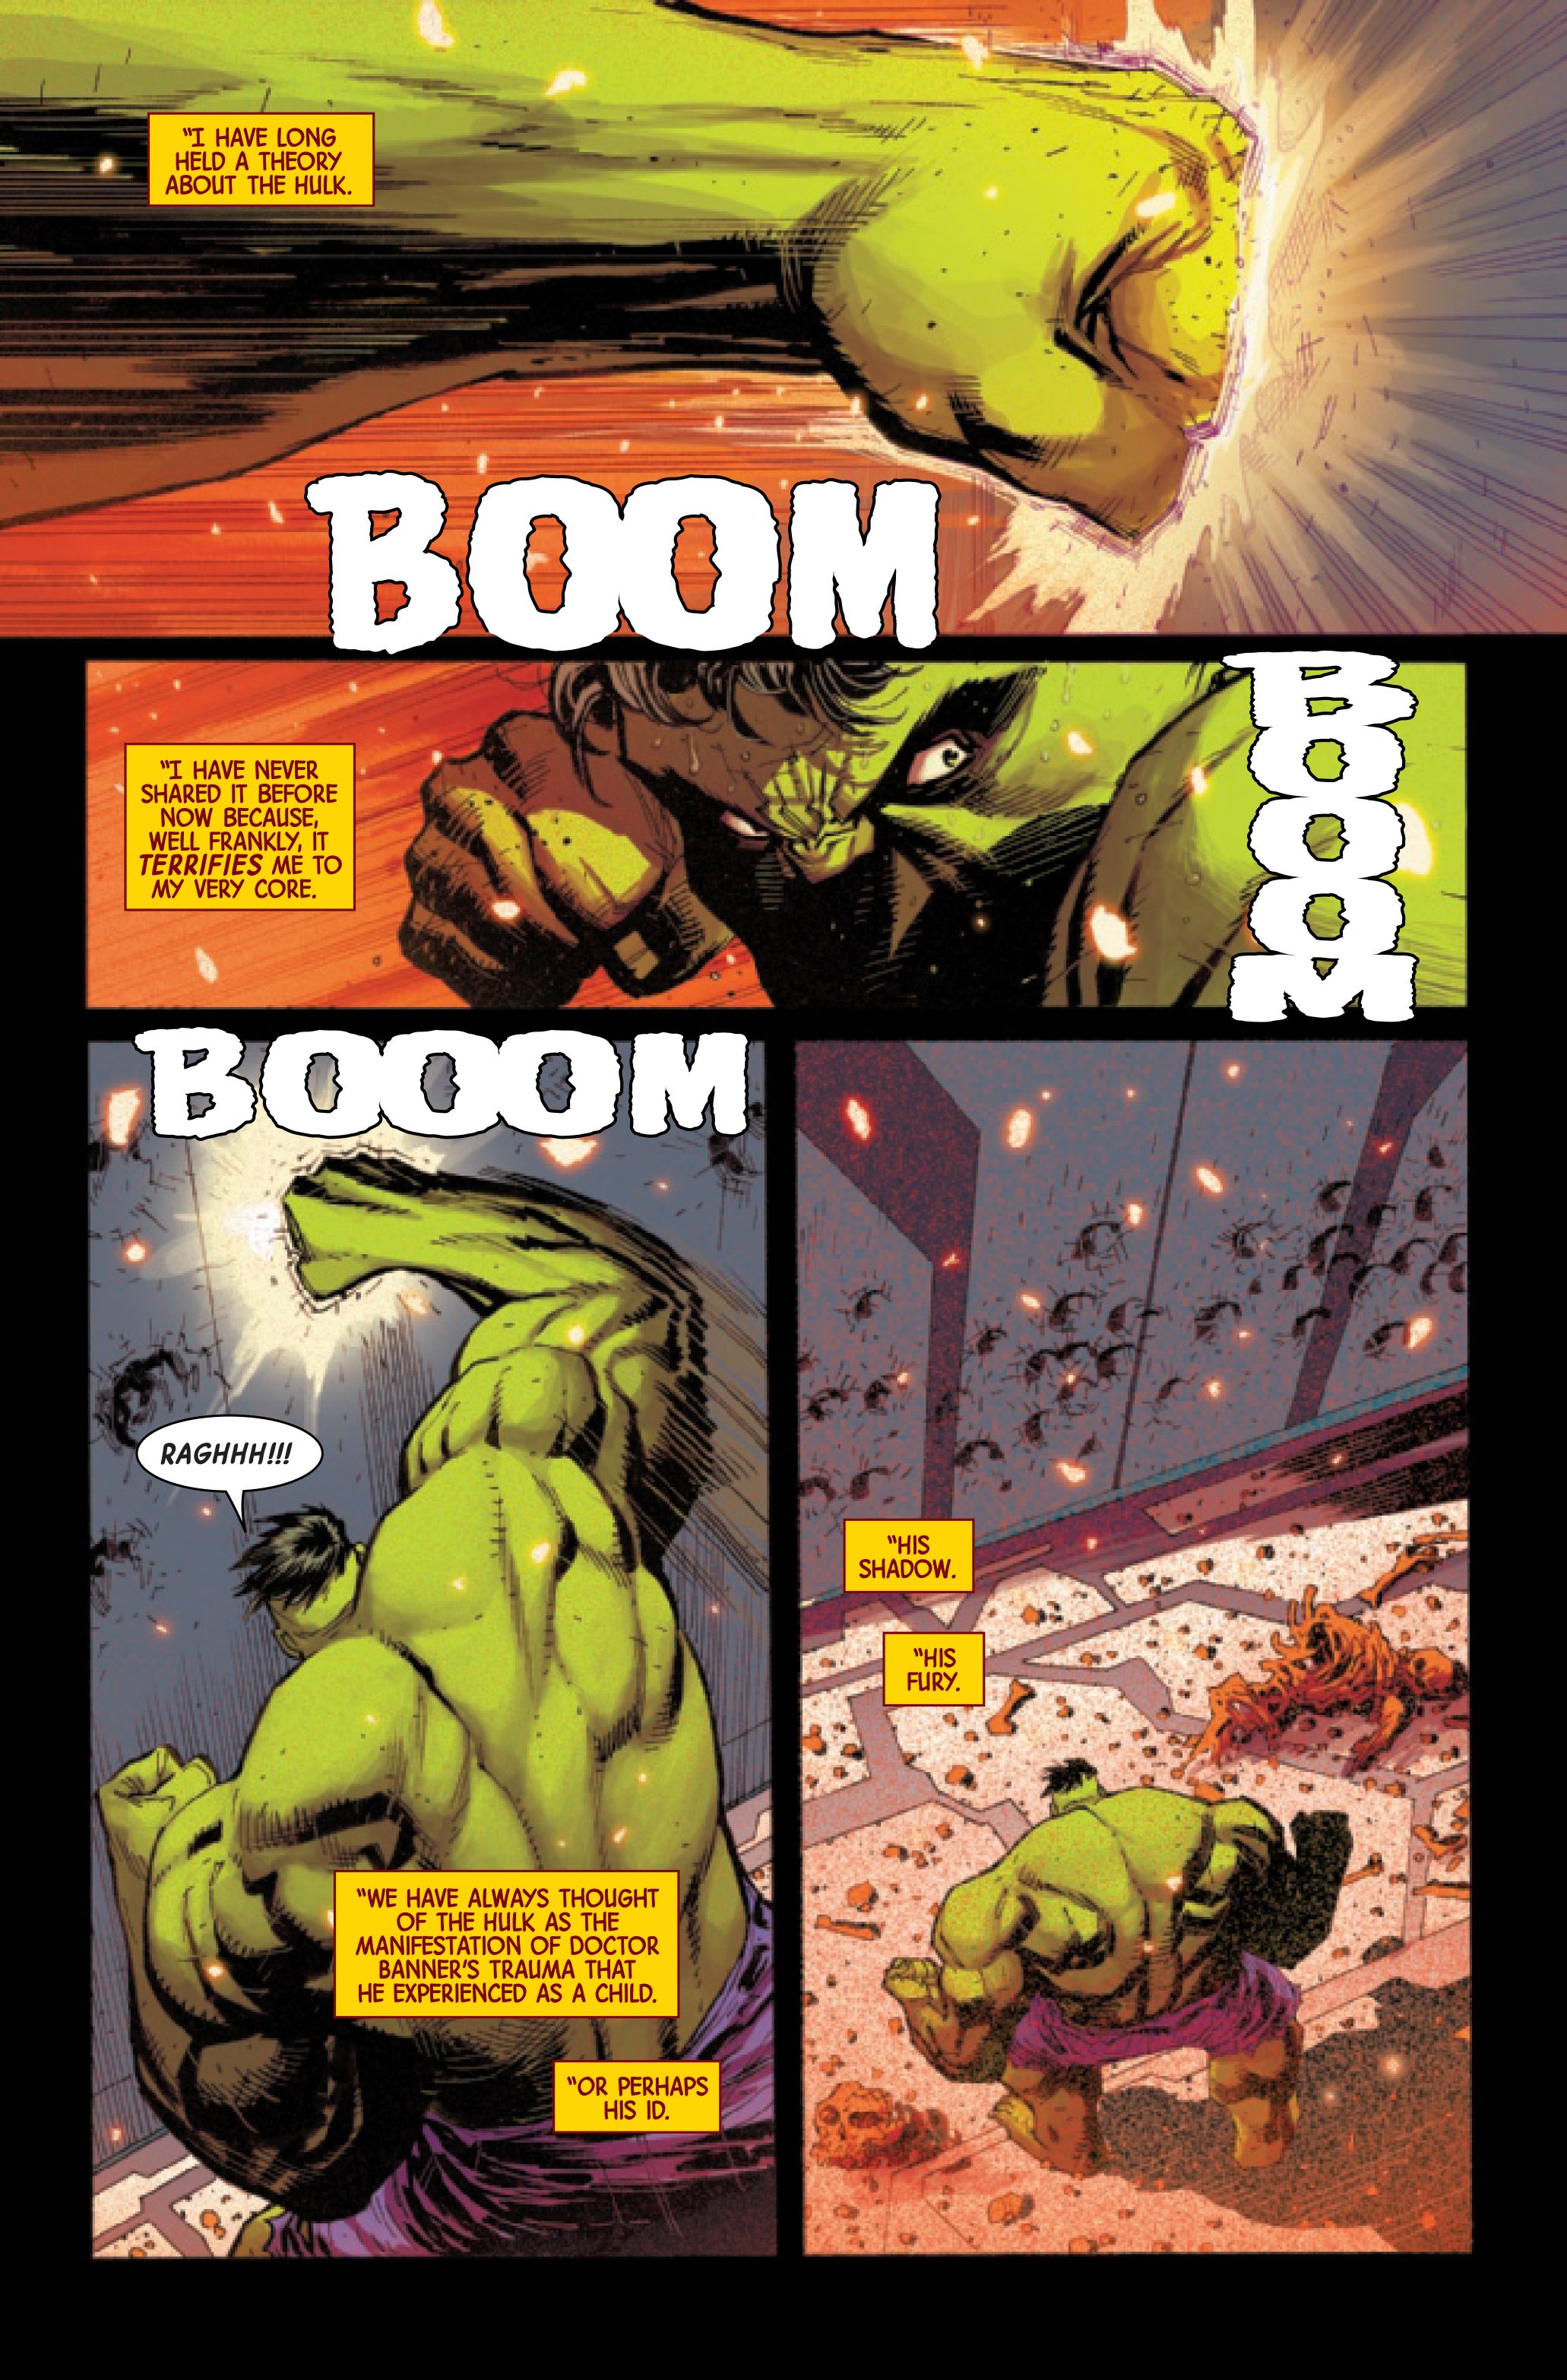 Page 1 of Hulk #1, by Donny Cates, Ryan Ottley and Frank Martin.